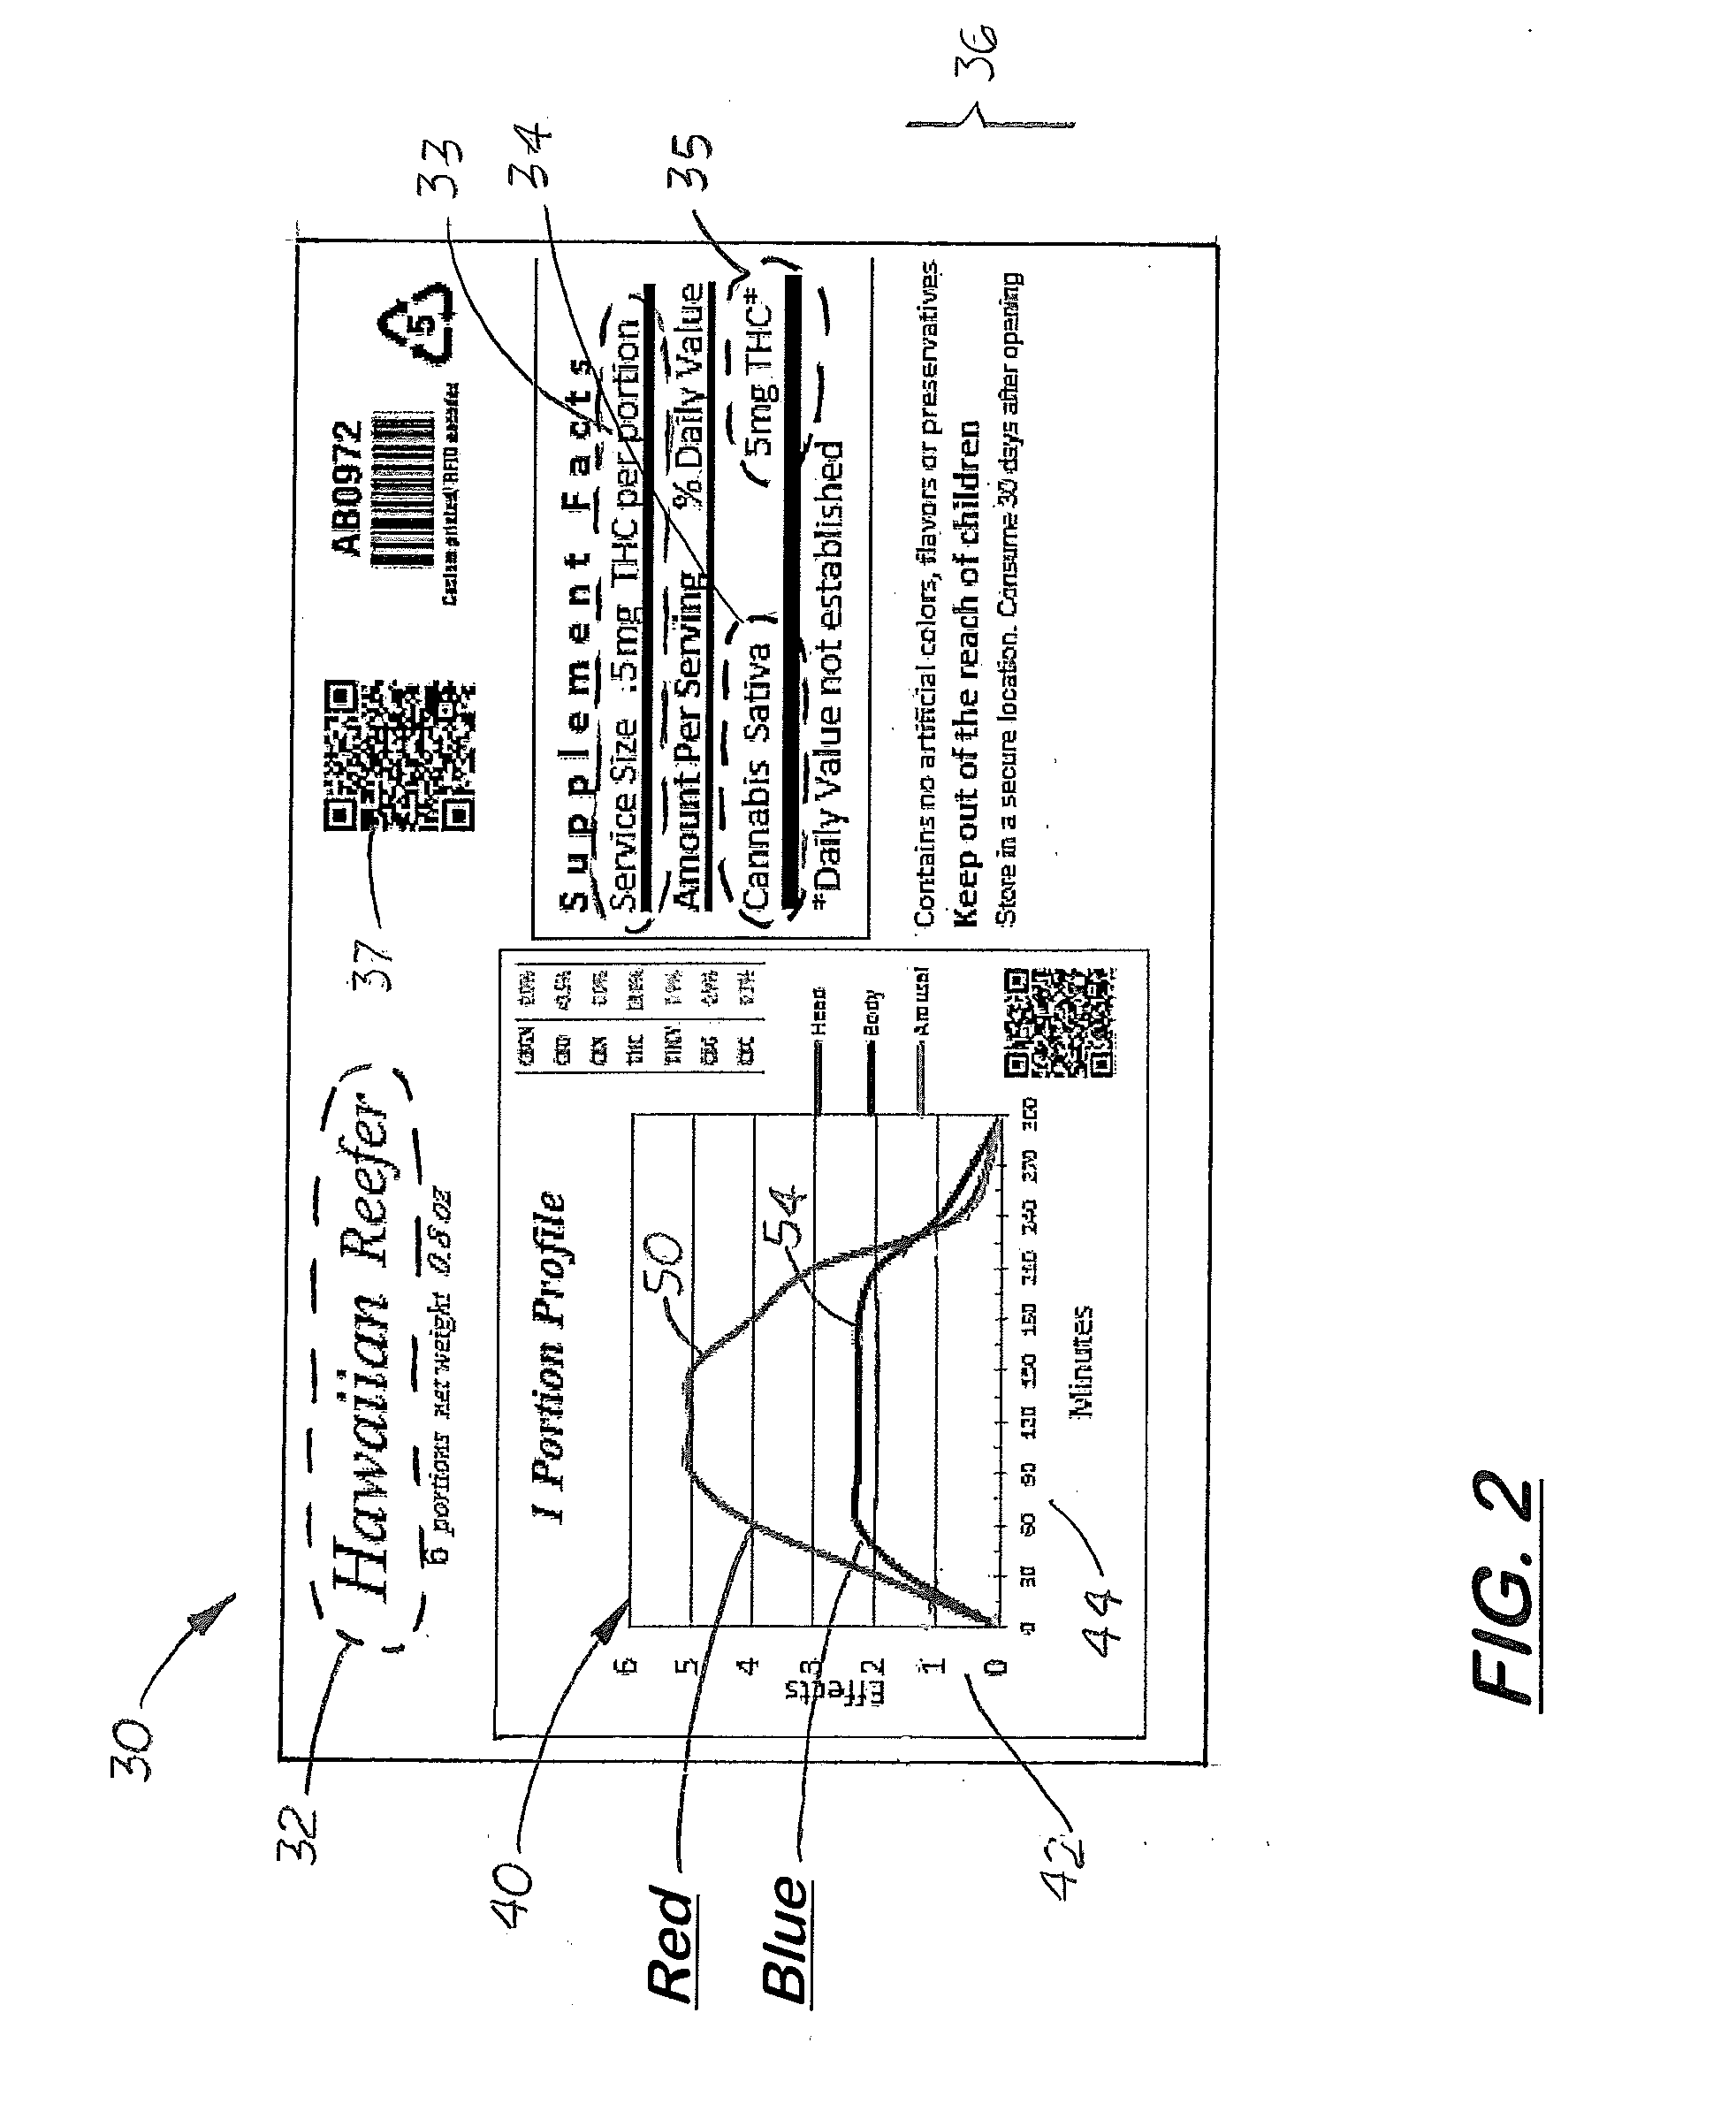 Cannabis Product Updated User Feedback System and Method